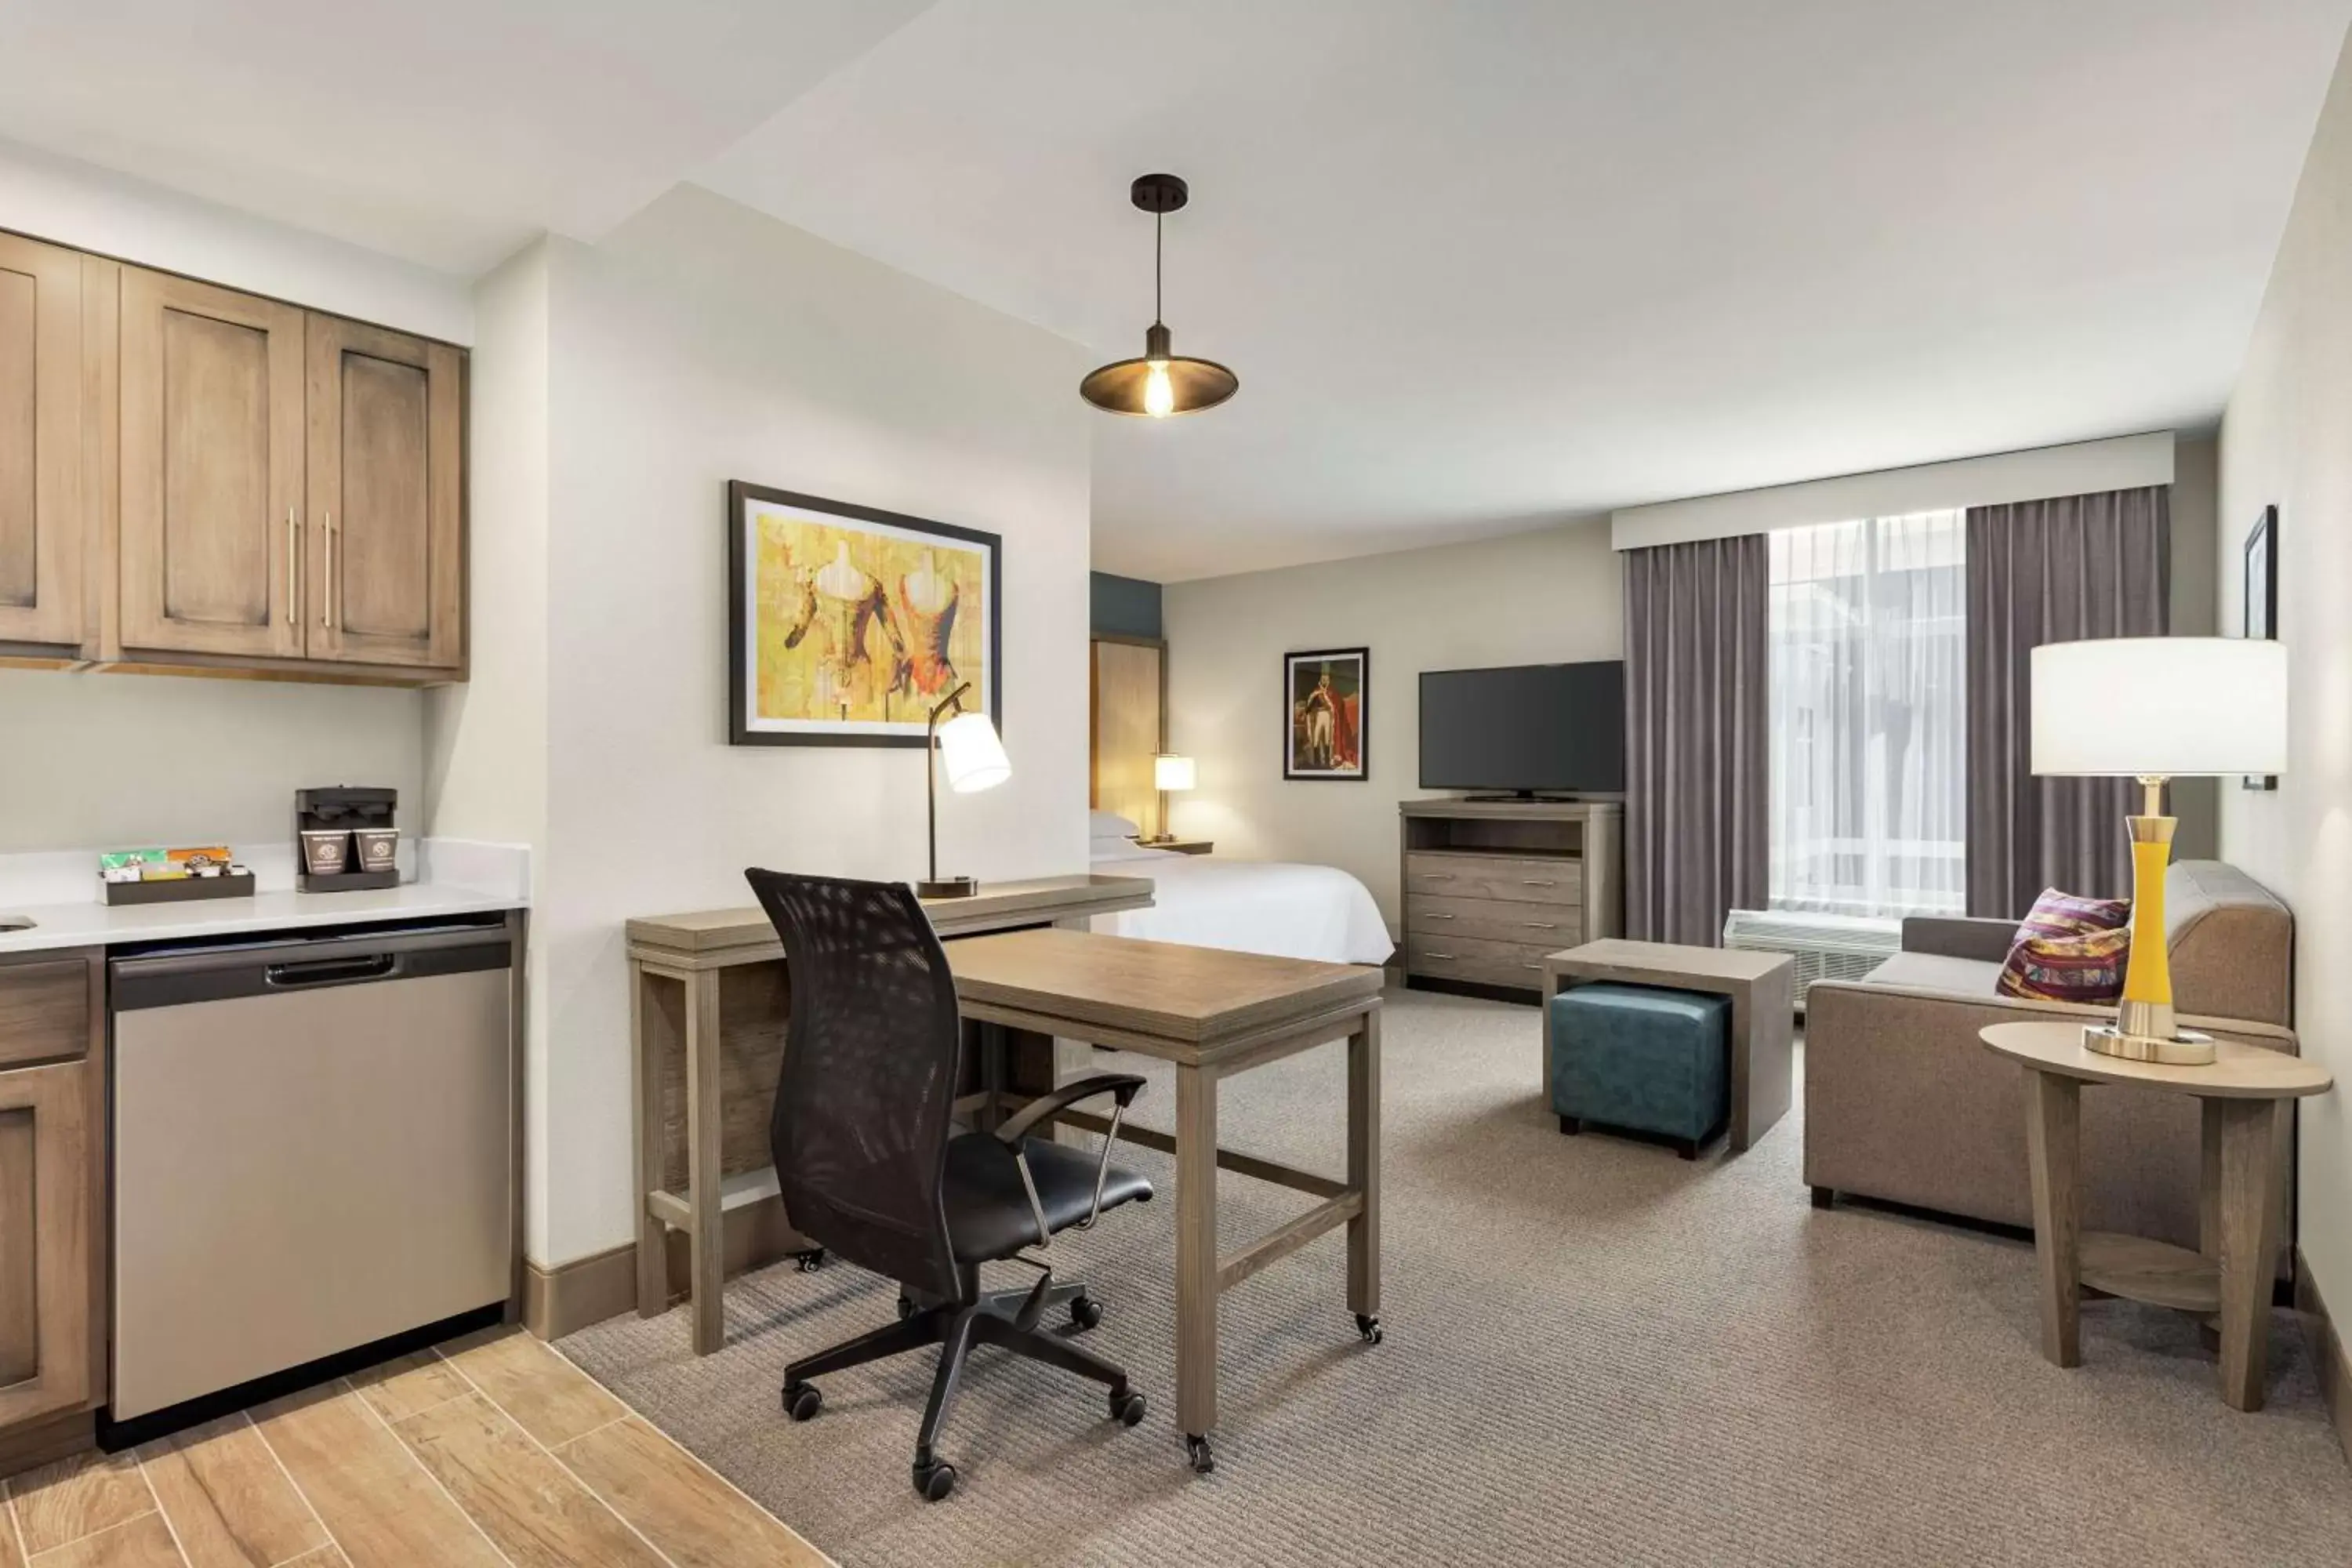 Bedroom, Dining Area in Homewood Suites By Hilton Carlisle